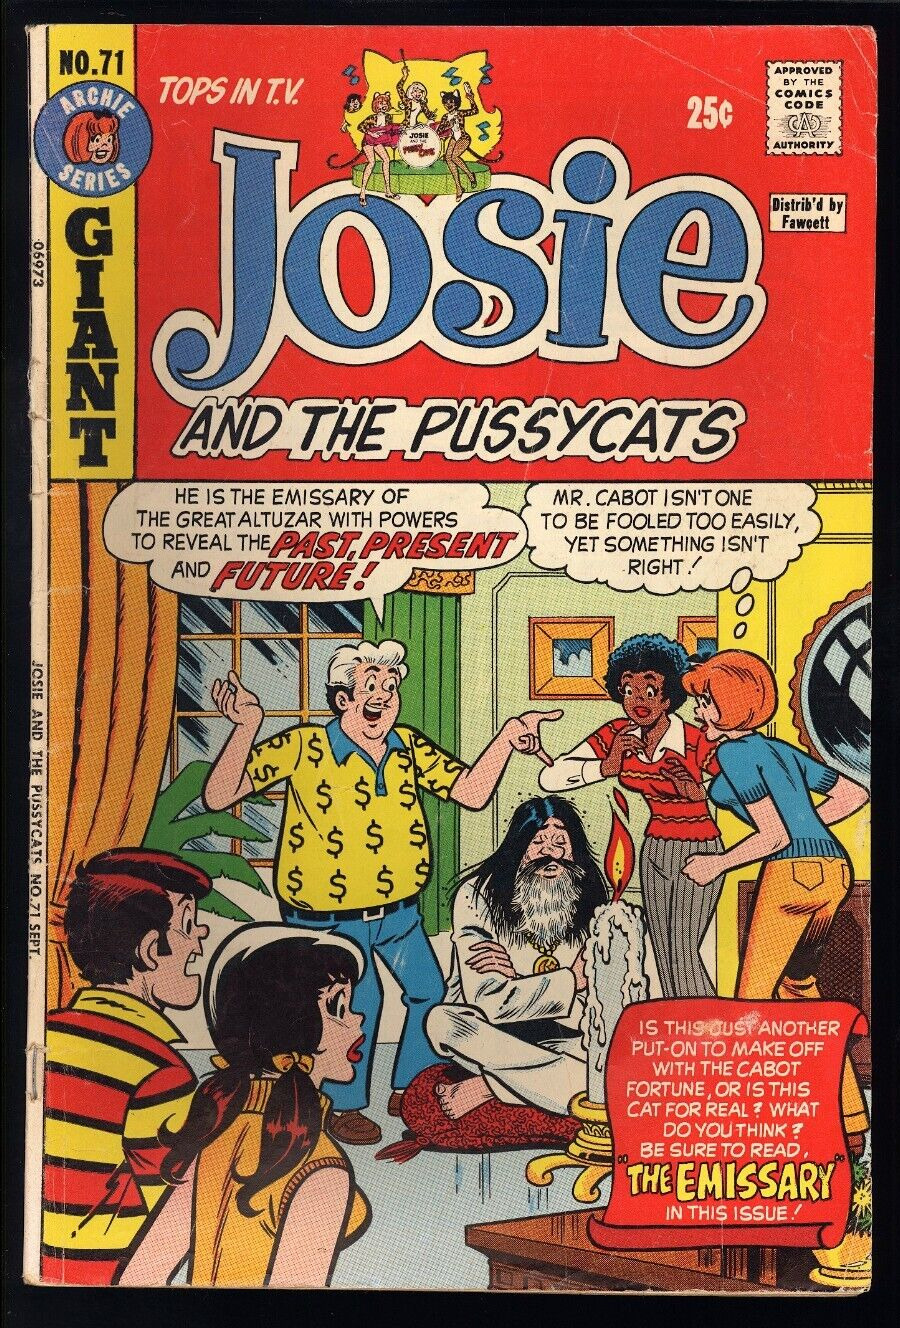 Josie and the Pussycats #71 Marvel 1973 (VG/FN) Stan Goldberg Cover! L@@K!